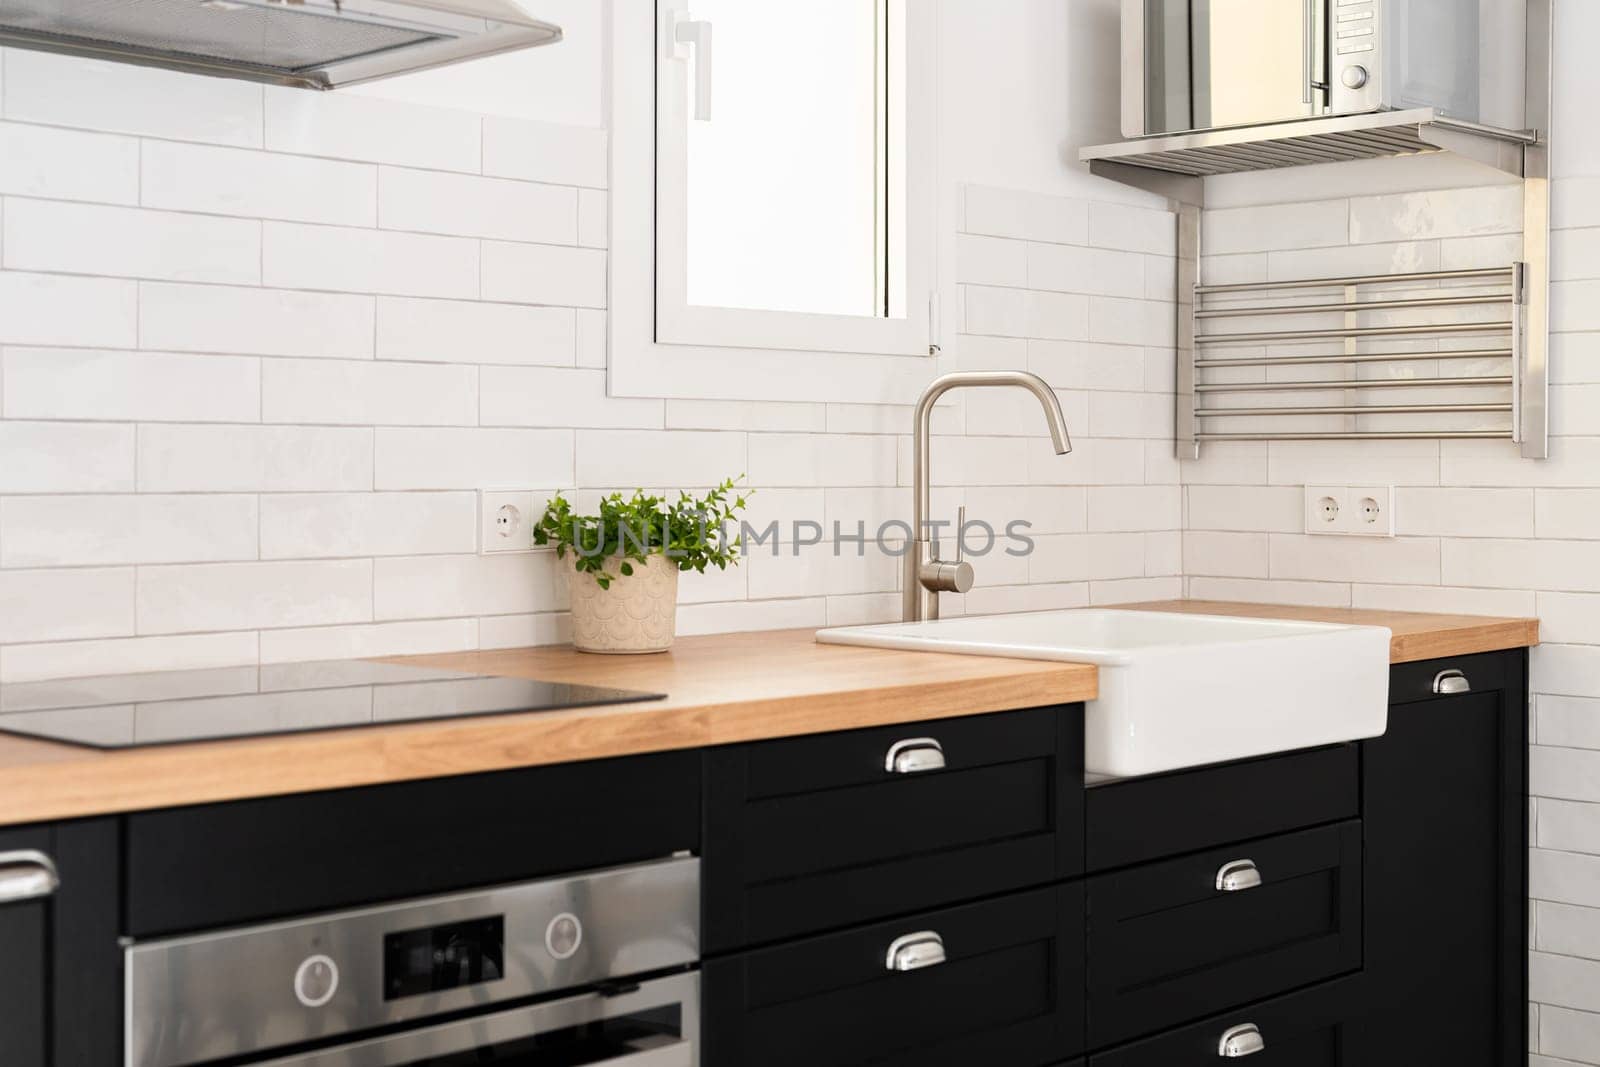 Washing sink with faucet by window in modern kitchen by apavlin